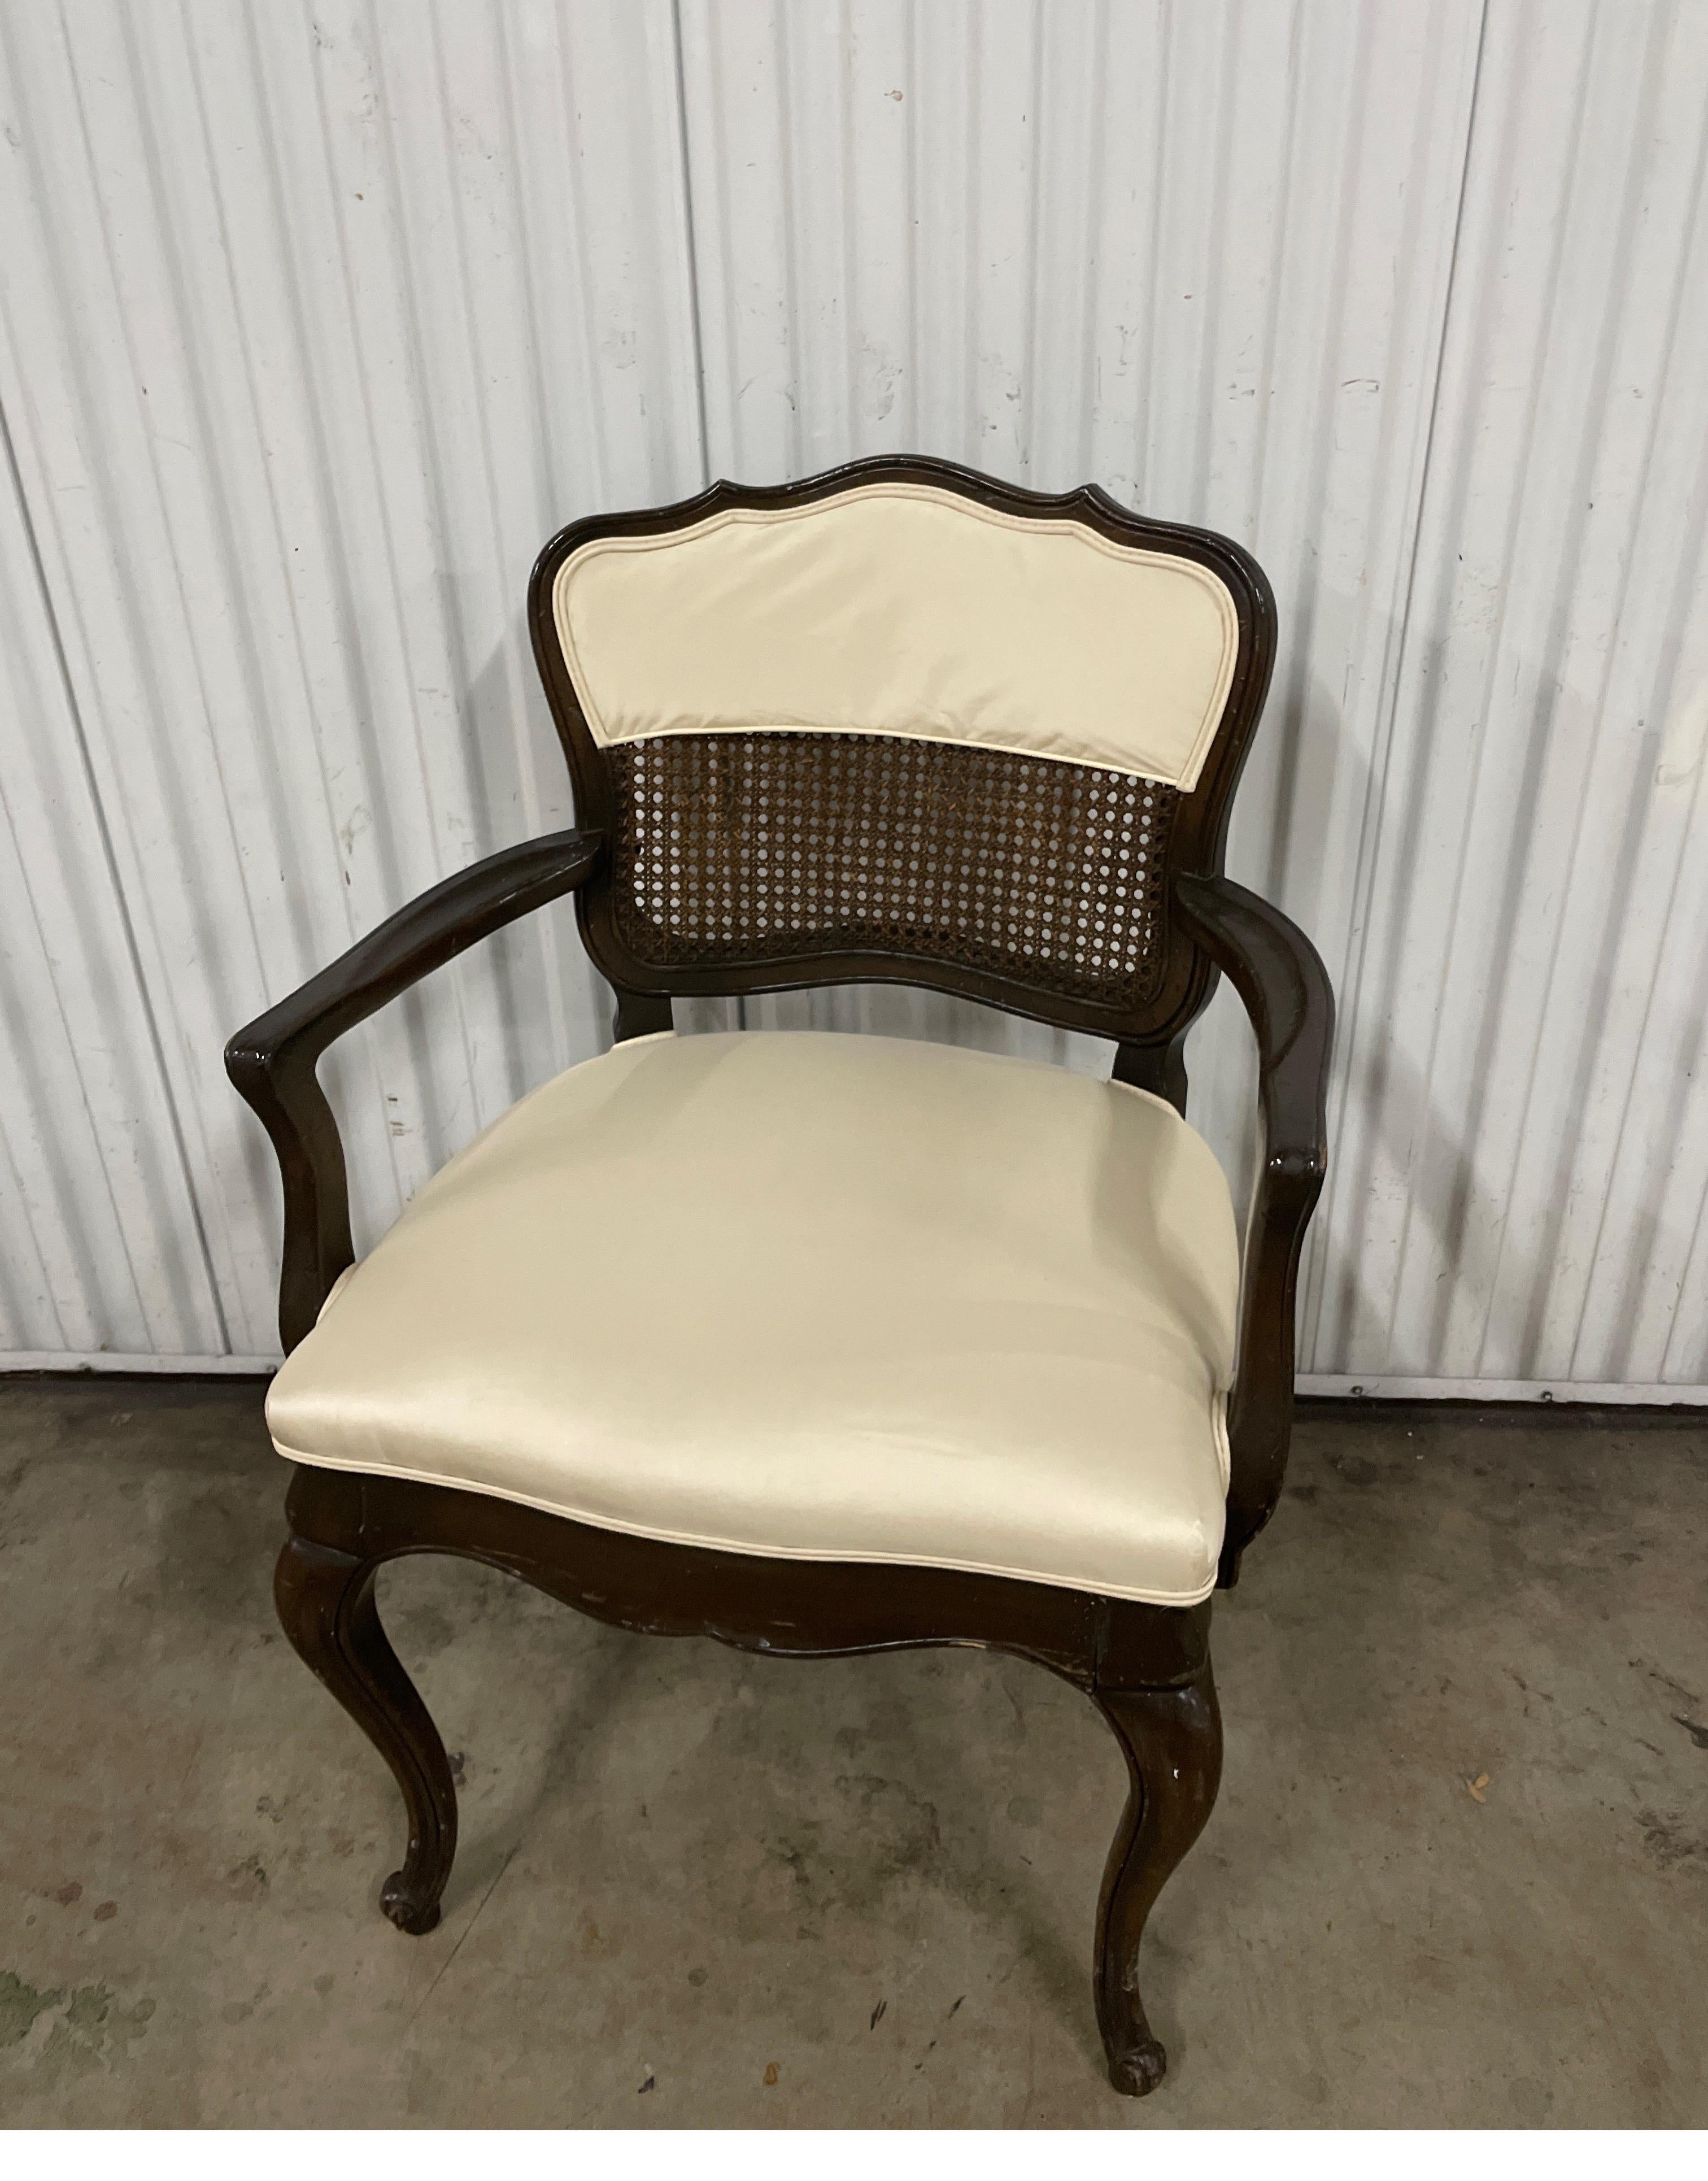 Vintage Louis XVI style Country French Armchair with new upholstery. A complete cane back with partial fabric at top.